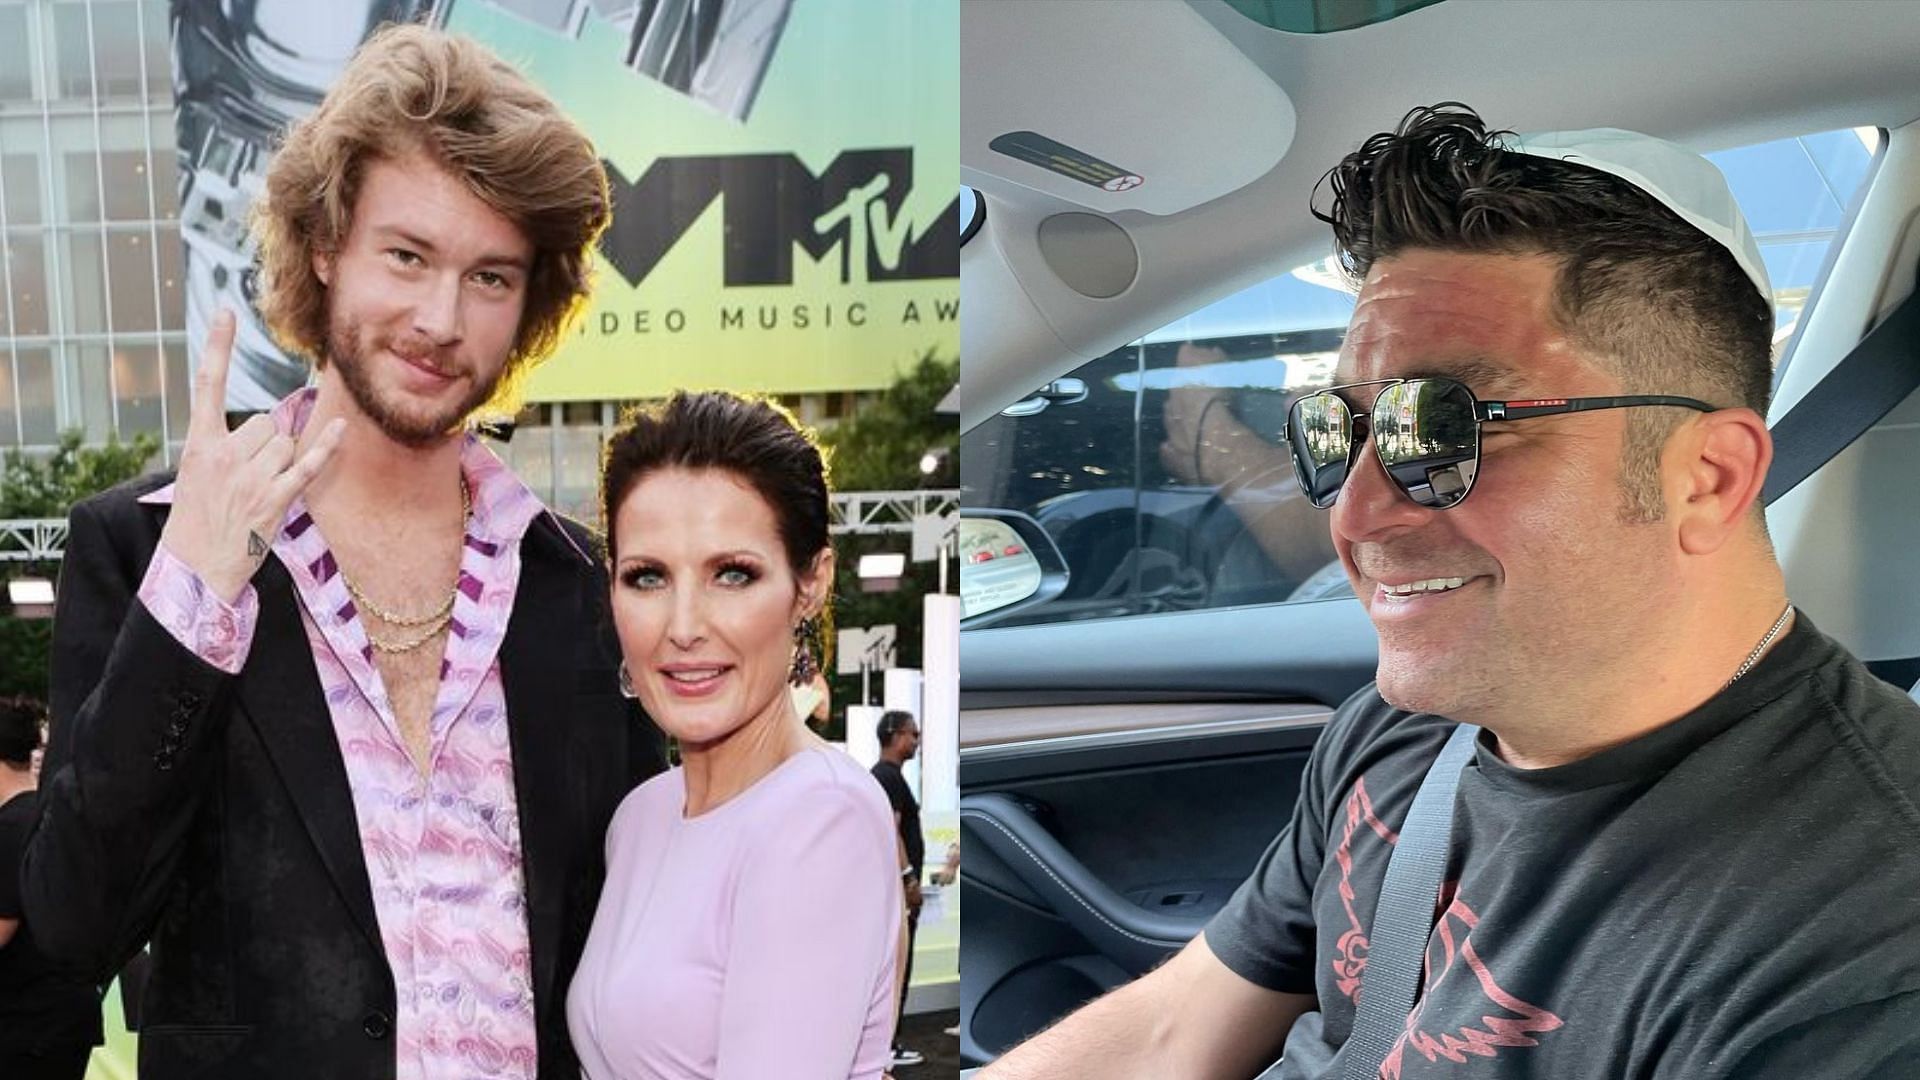 (left) Sheri Easterling attended the VMAs with Yung Gravy (right) Monty Lopez (Image via Jamie McCarthy/Getty Images/montylopez/Instagram)